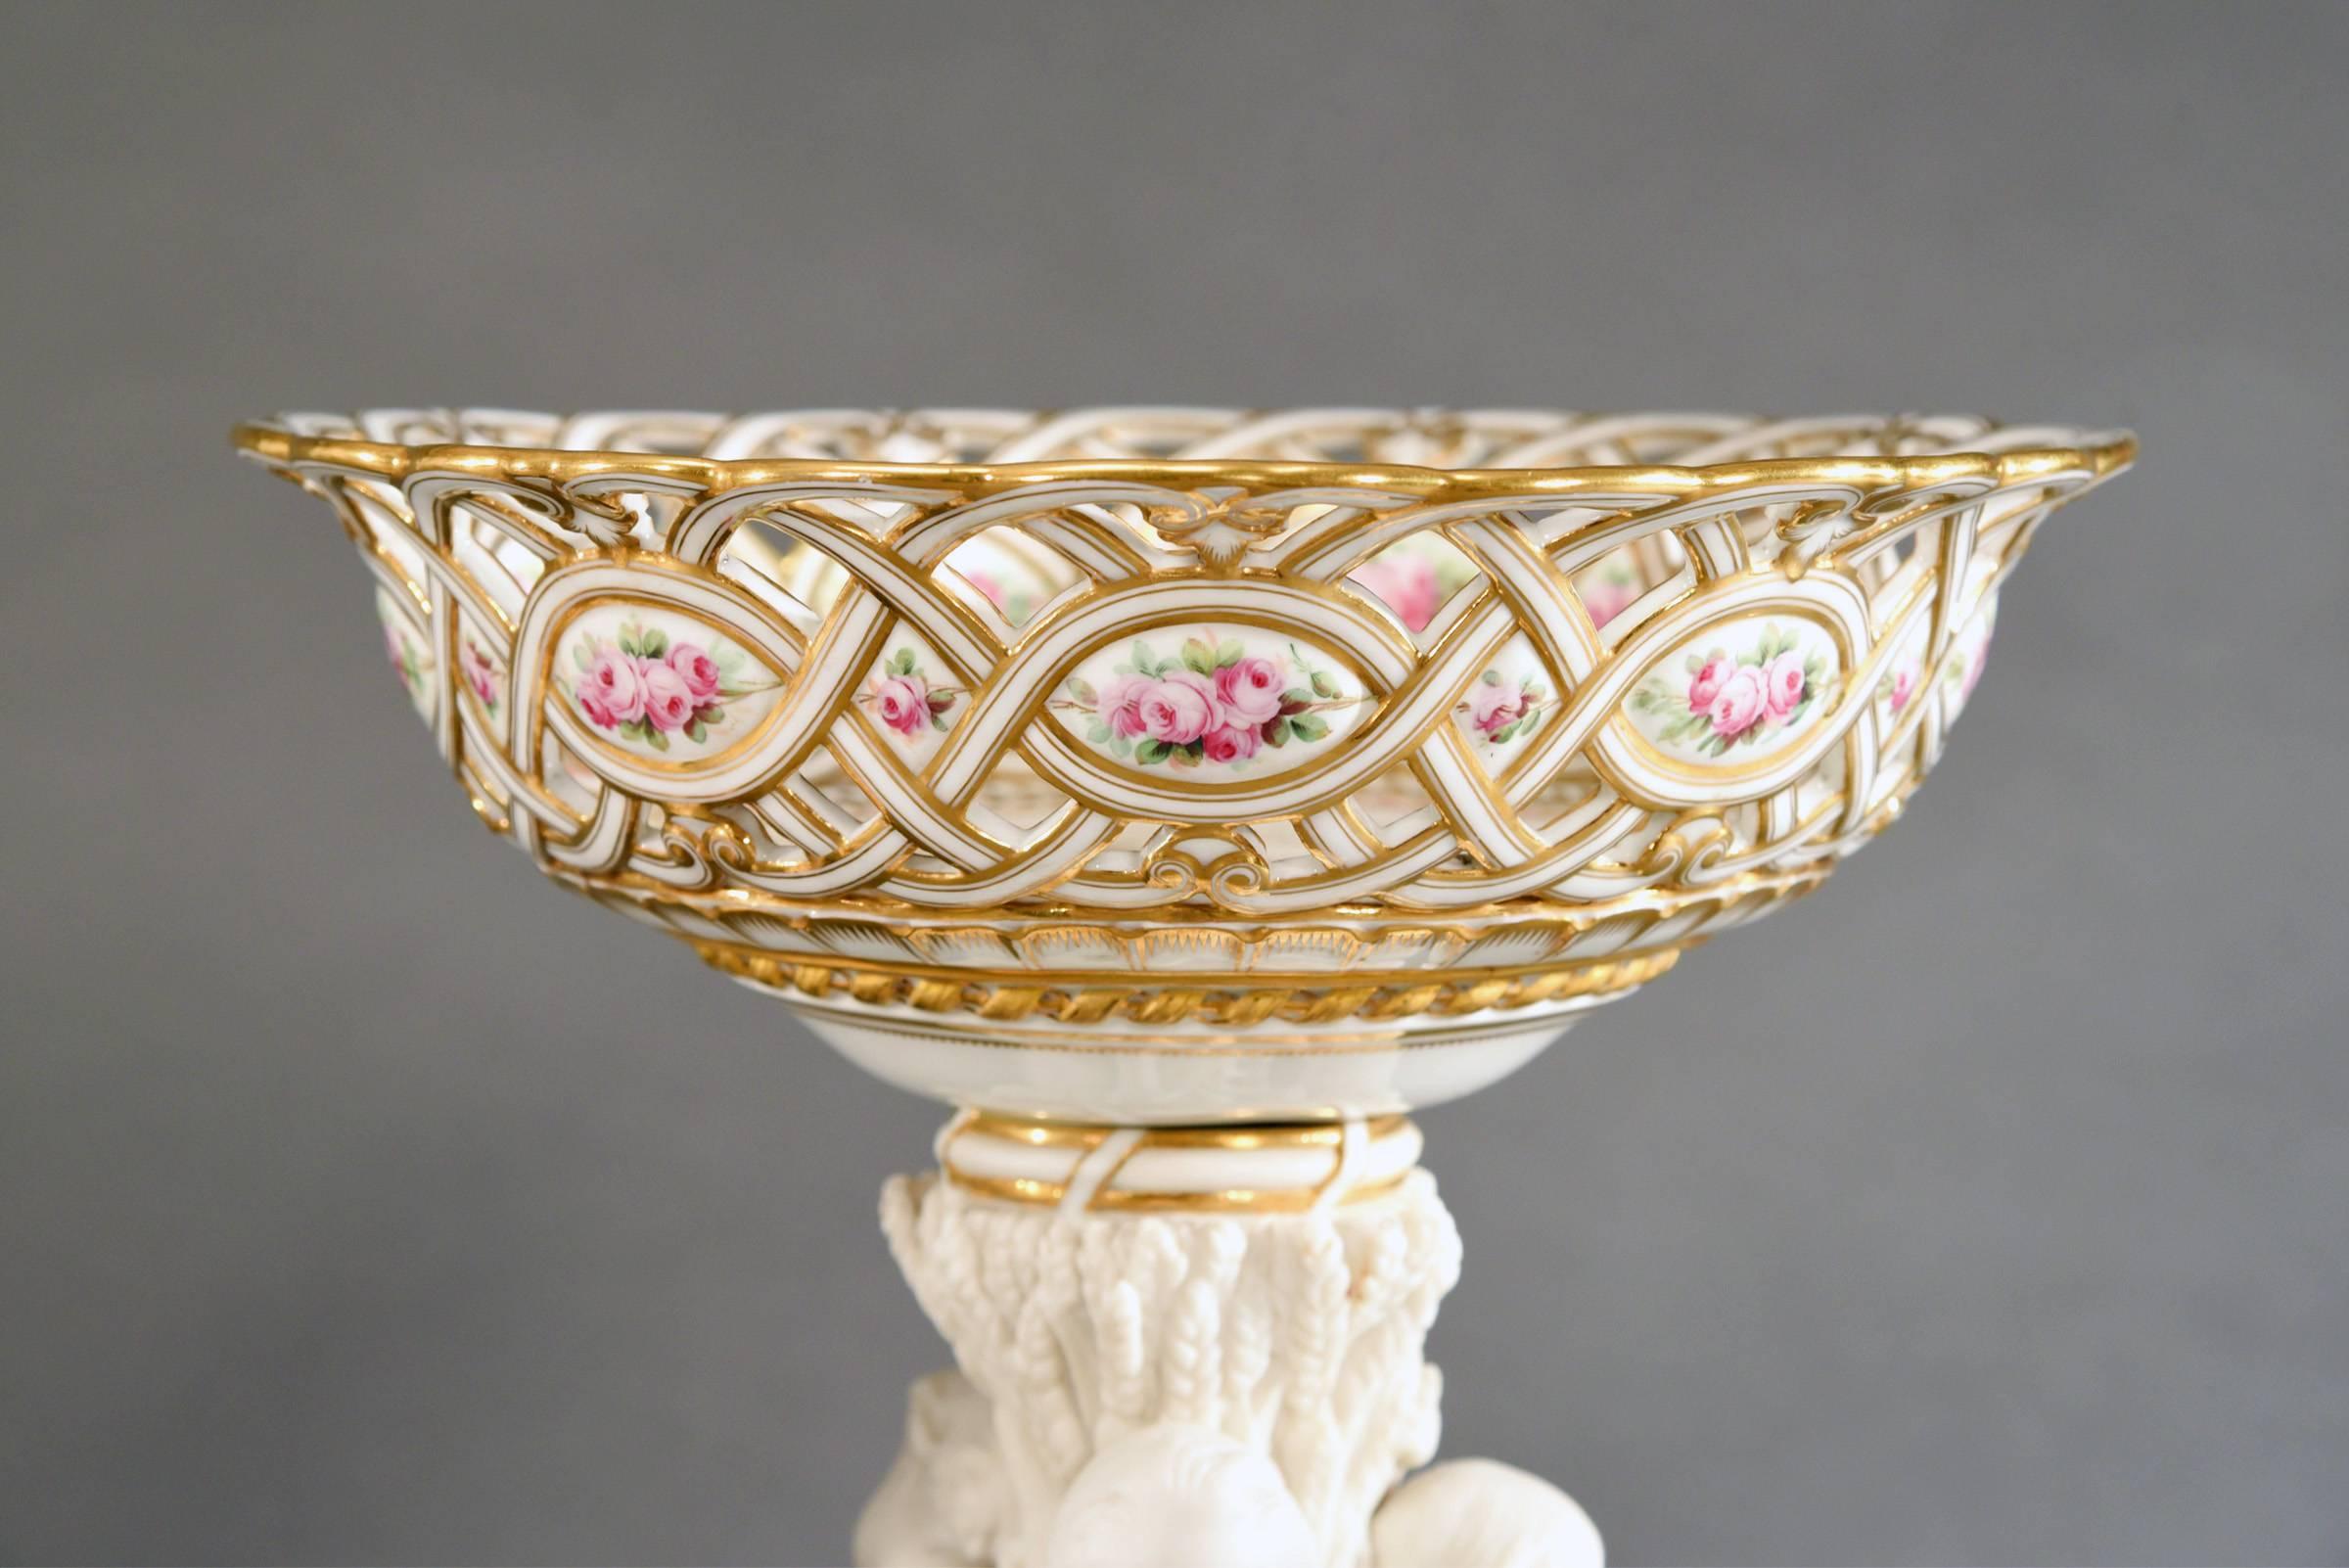 Minton 19th C Gilt Dessert Service 15 Pc. W/ Parian Figures Hand Painted Roses In Excellent Condition For Sale In Great Barrington, MA